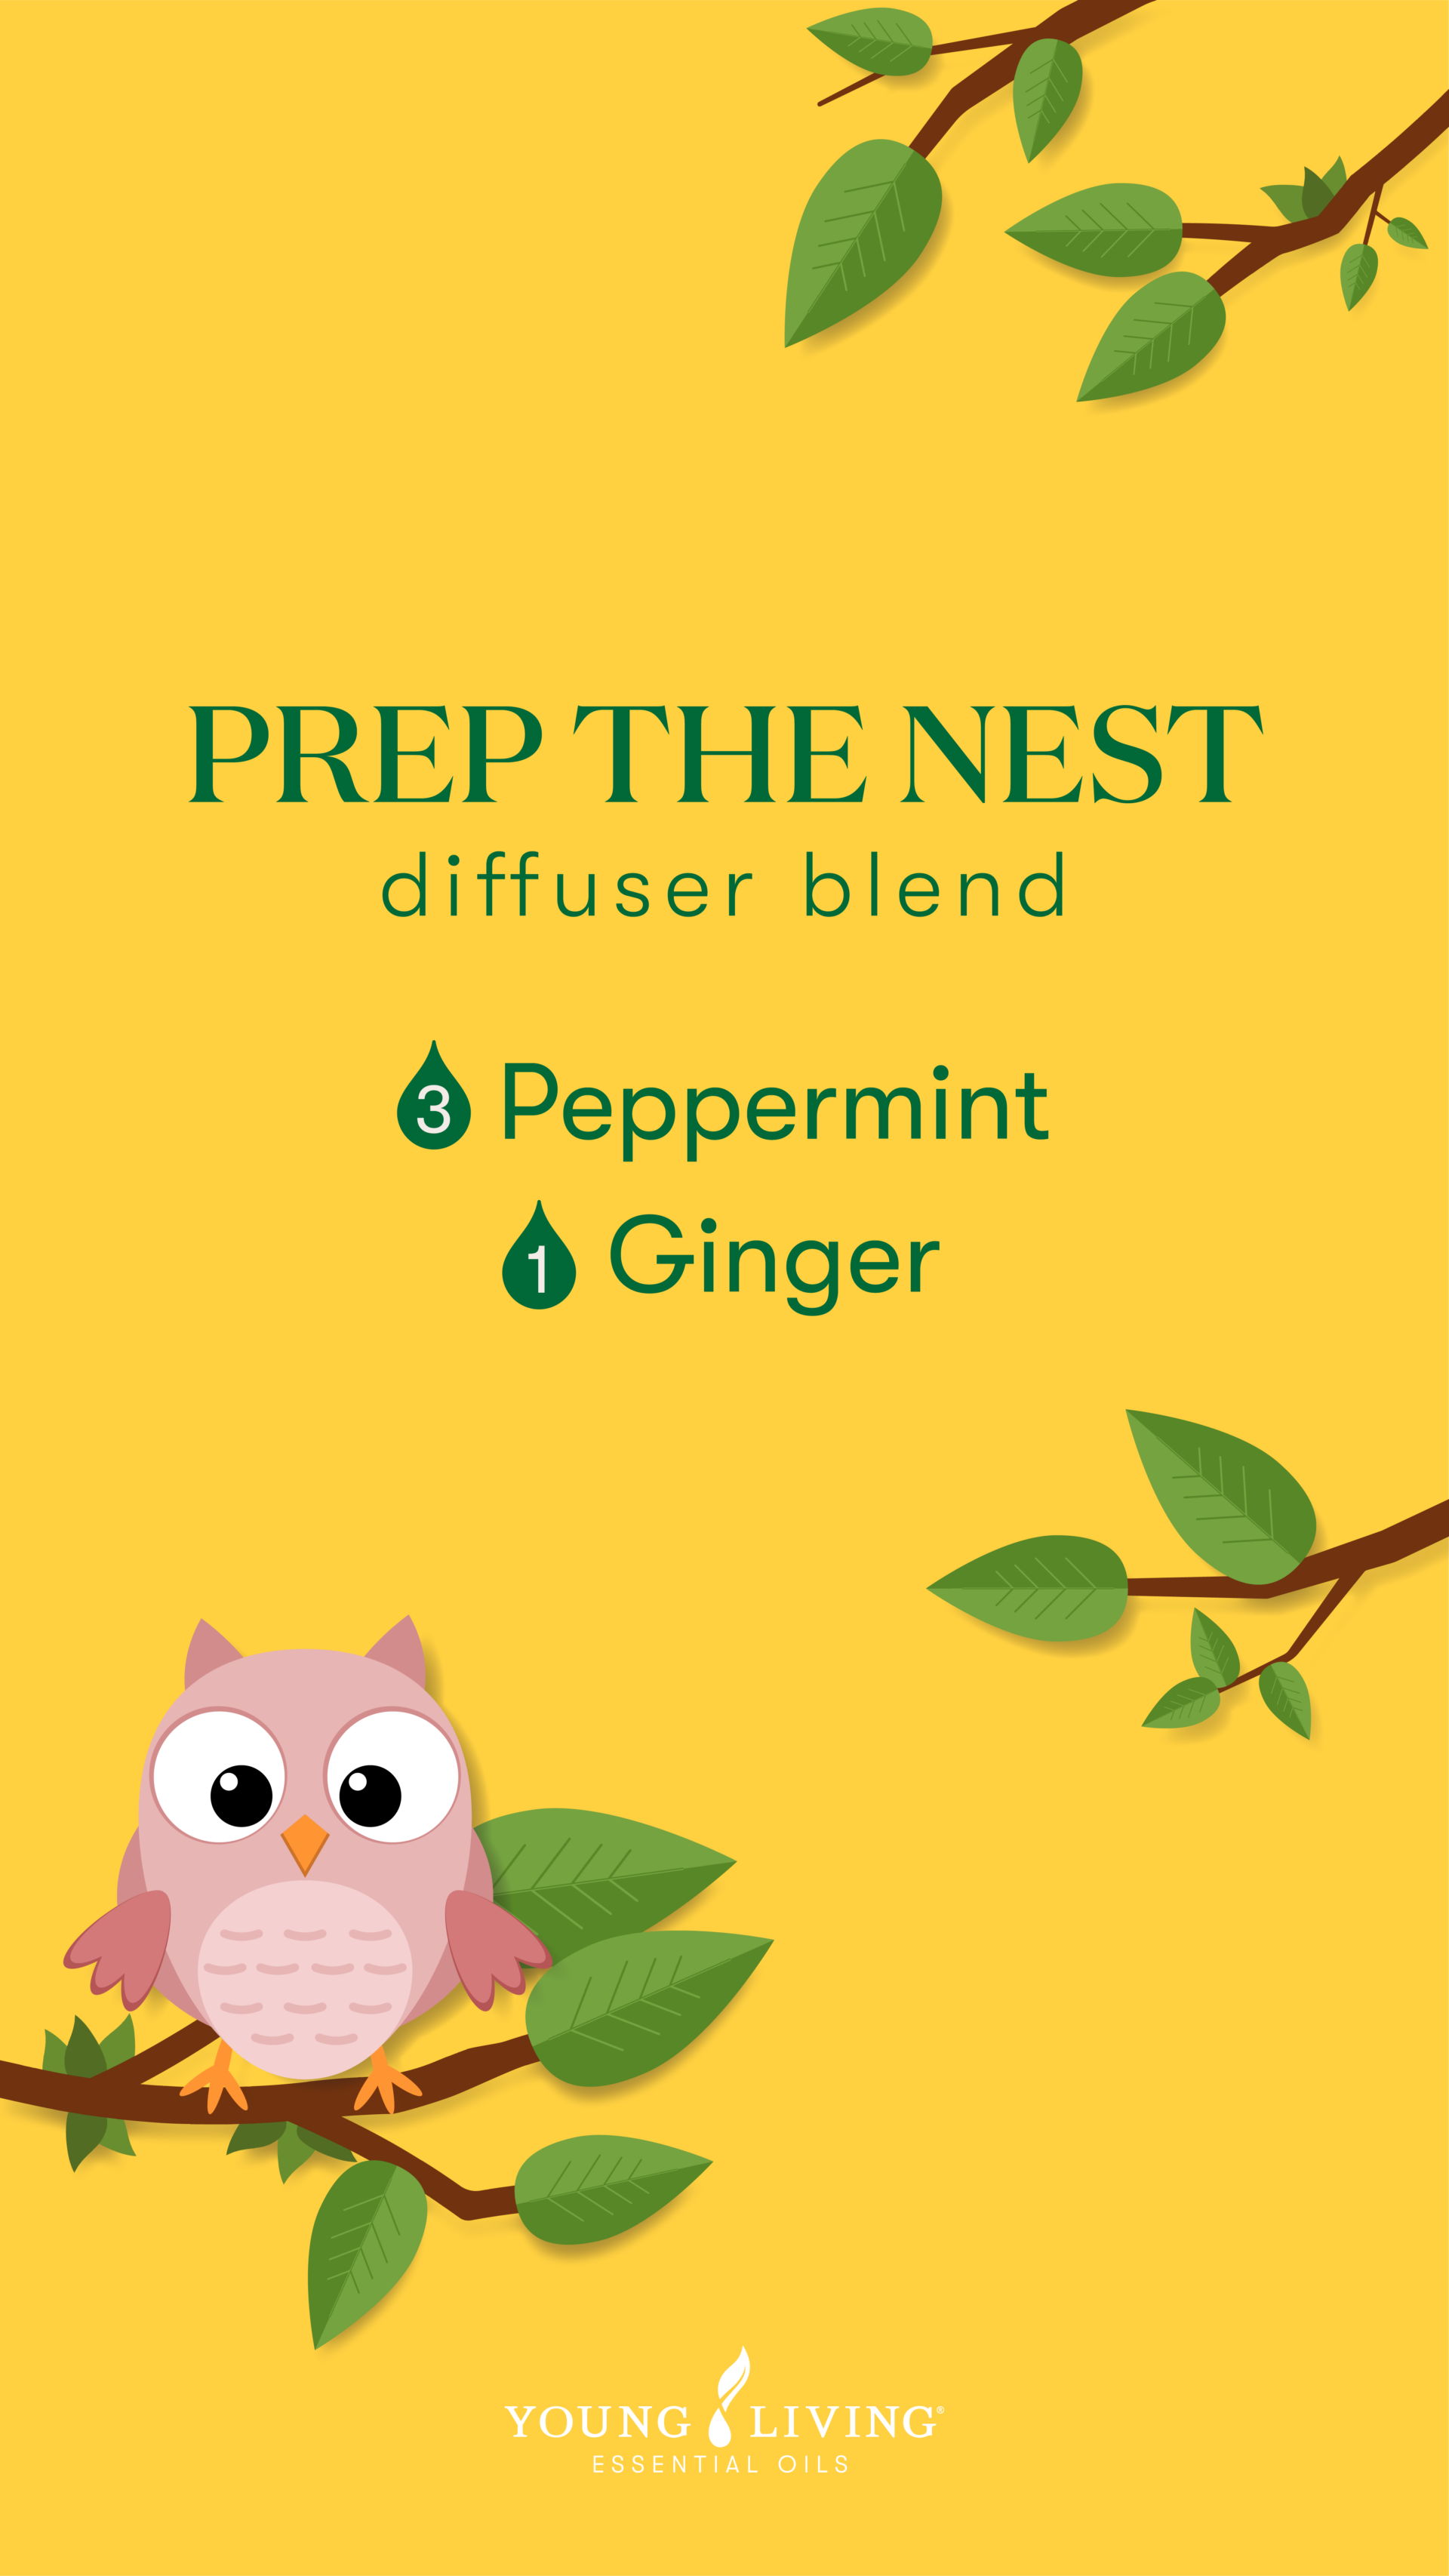 Prep the Nest diffuser blend - Young Living Lavender Life Blog